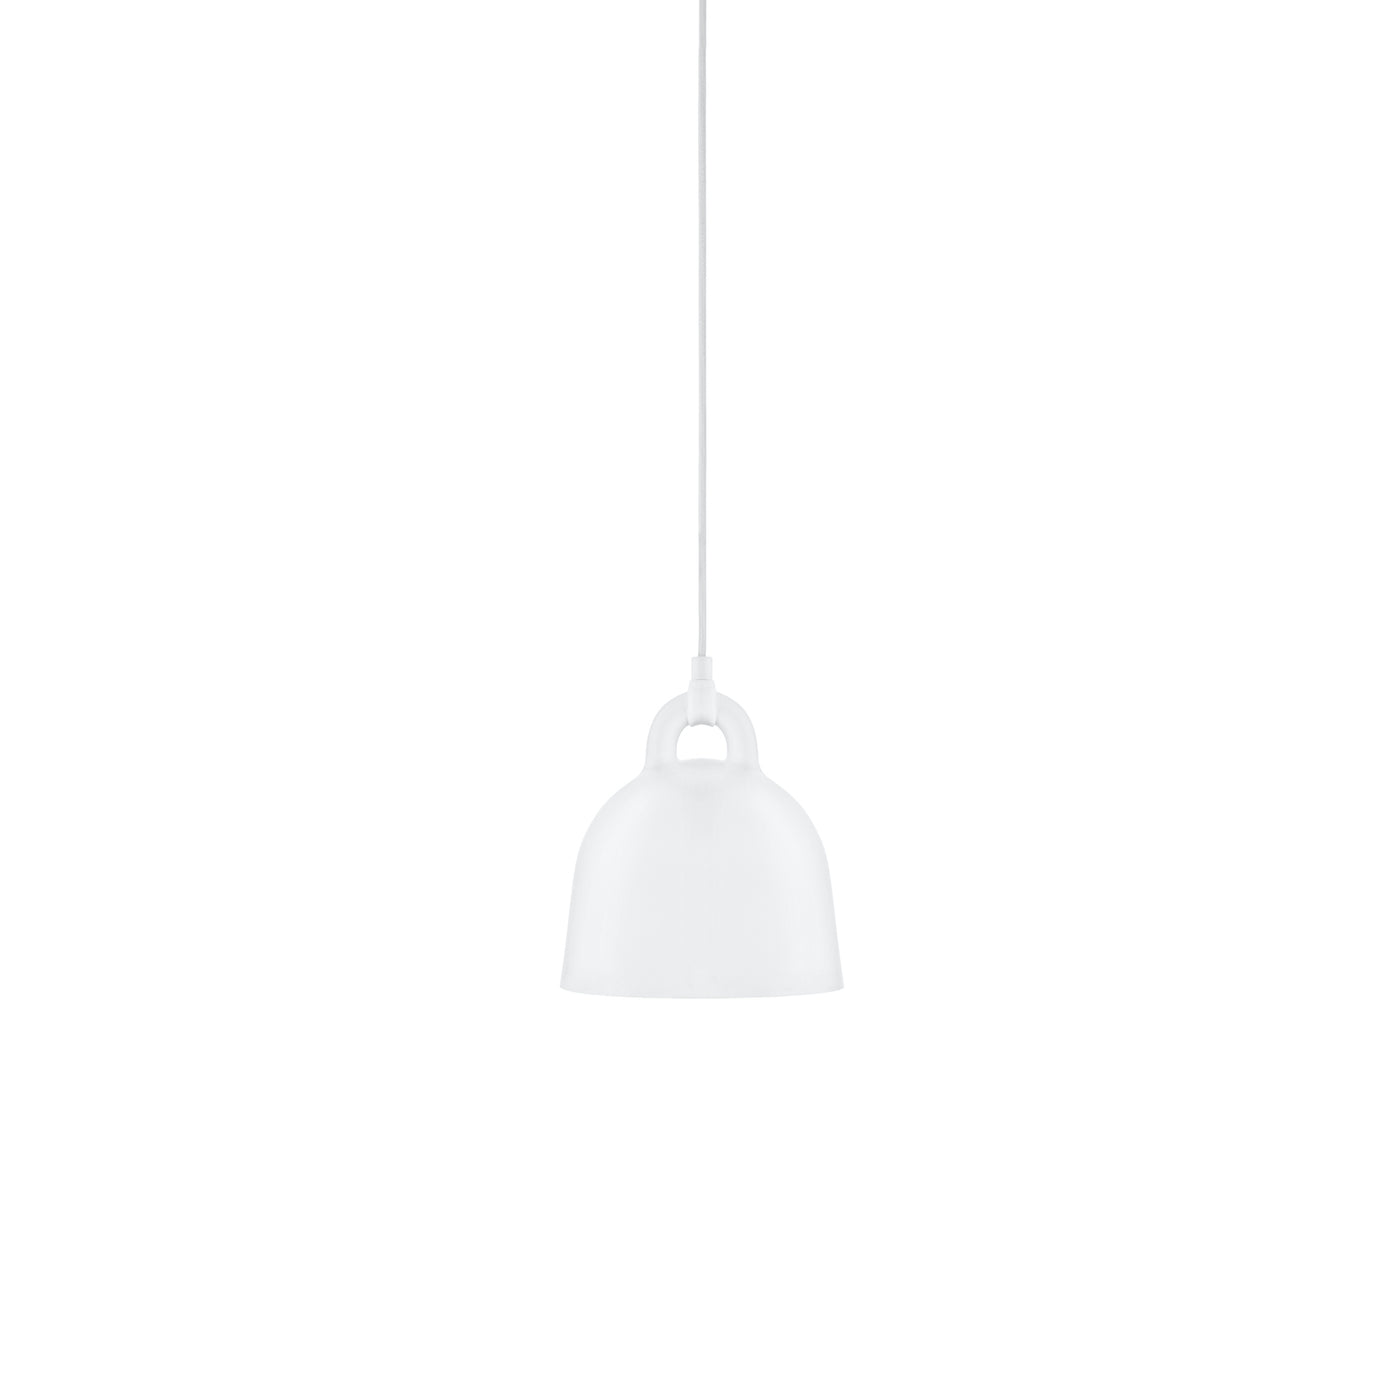 Norman Copenhagen Bell Pendant Lamp, extra small in white. Free UK delivery from someday designs #size_extra-small